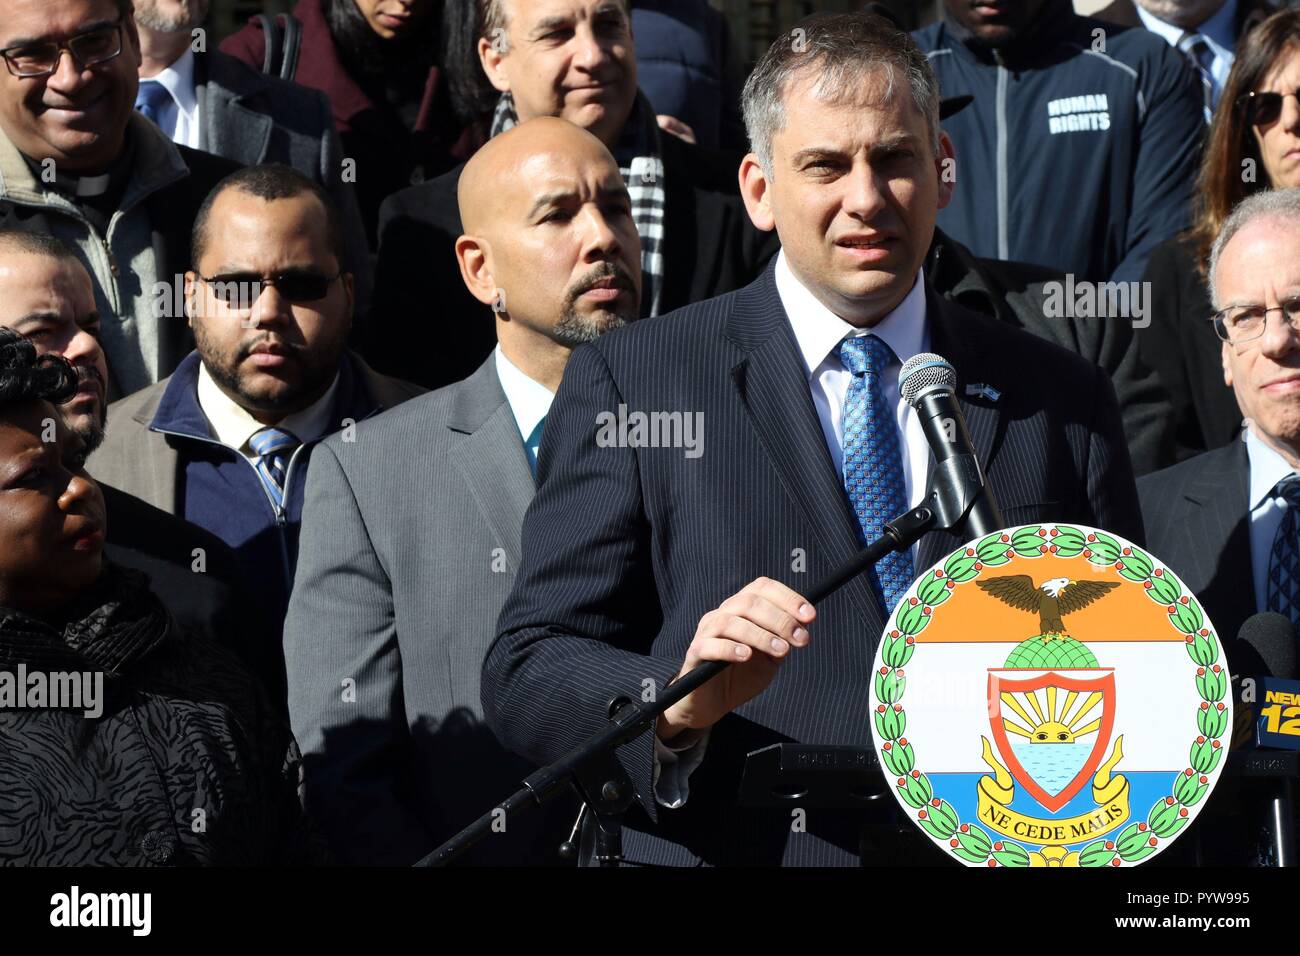 New York City, New York, USA. 30th Oct, 2018. Israel Nitzan, Deputy Consul General of the state of Israe (R)l, address the ceowd at an interfaith pray vigil hosted by Bronx Borough President Ruben Diaz Jr. and the Jewish Community Relations Council of New York, was held at the Bronx County Building on 30 October, 2018. Elected leaders, clergy, court officials, community organizations and others joined in support with the Jewish community and stood united against hatred at the midday vigil. Credit: G. Ronald Lopez/ZUMA Wire/Alamy Live News Stock Photo